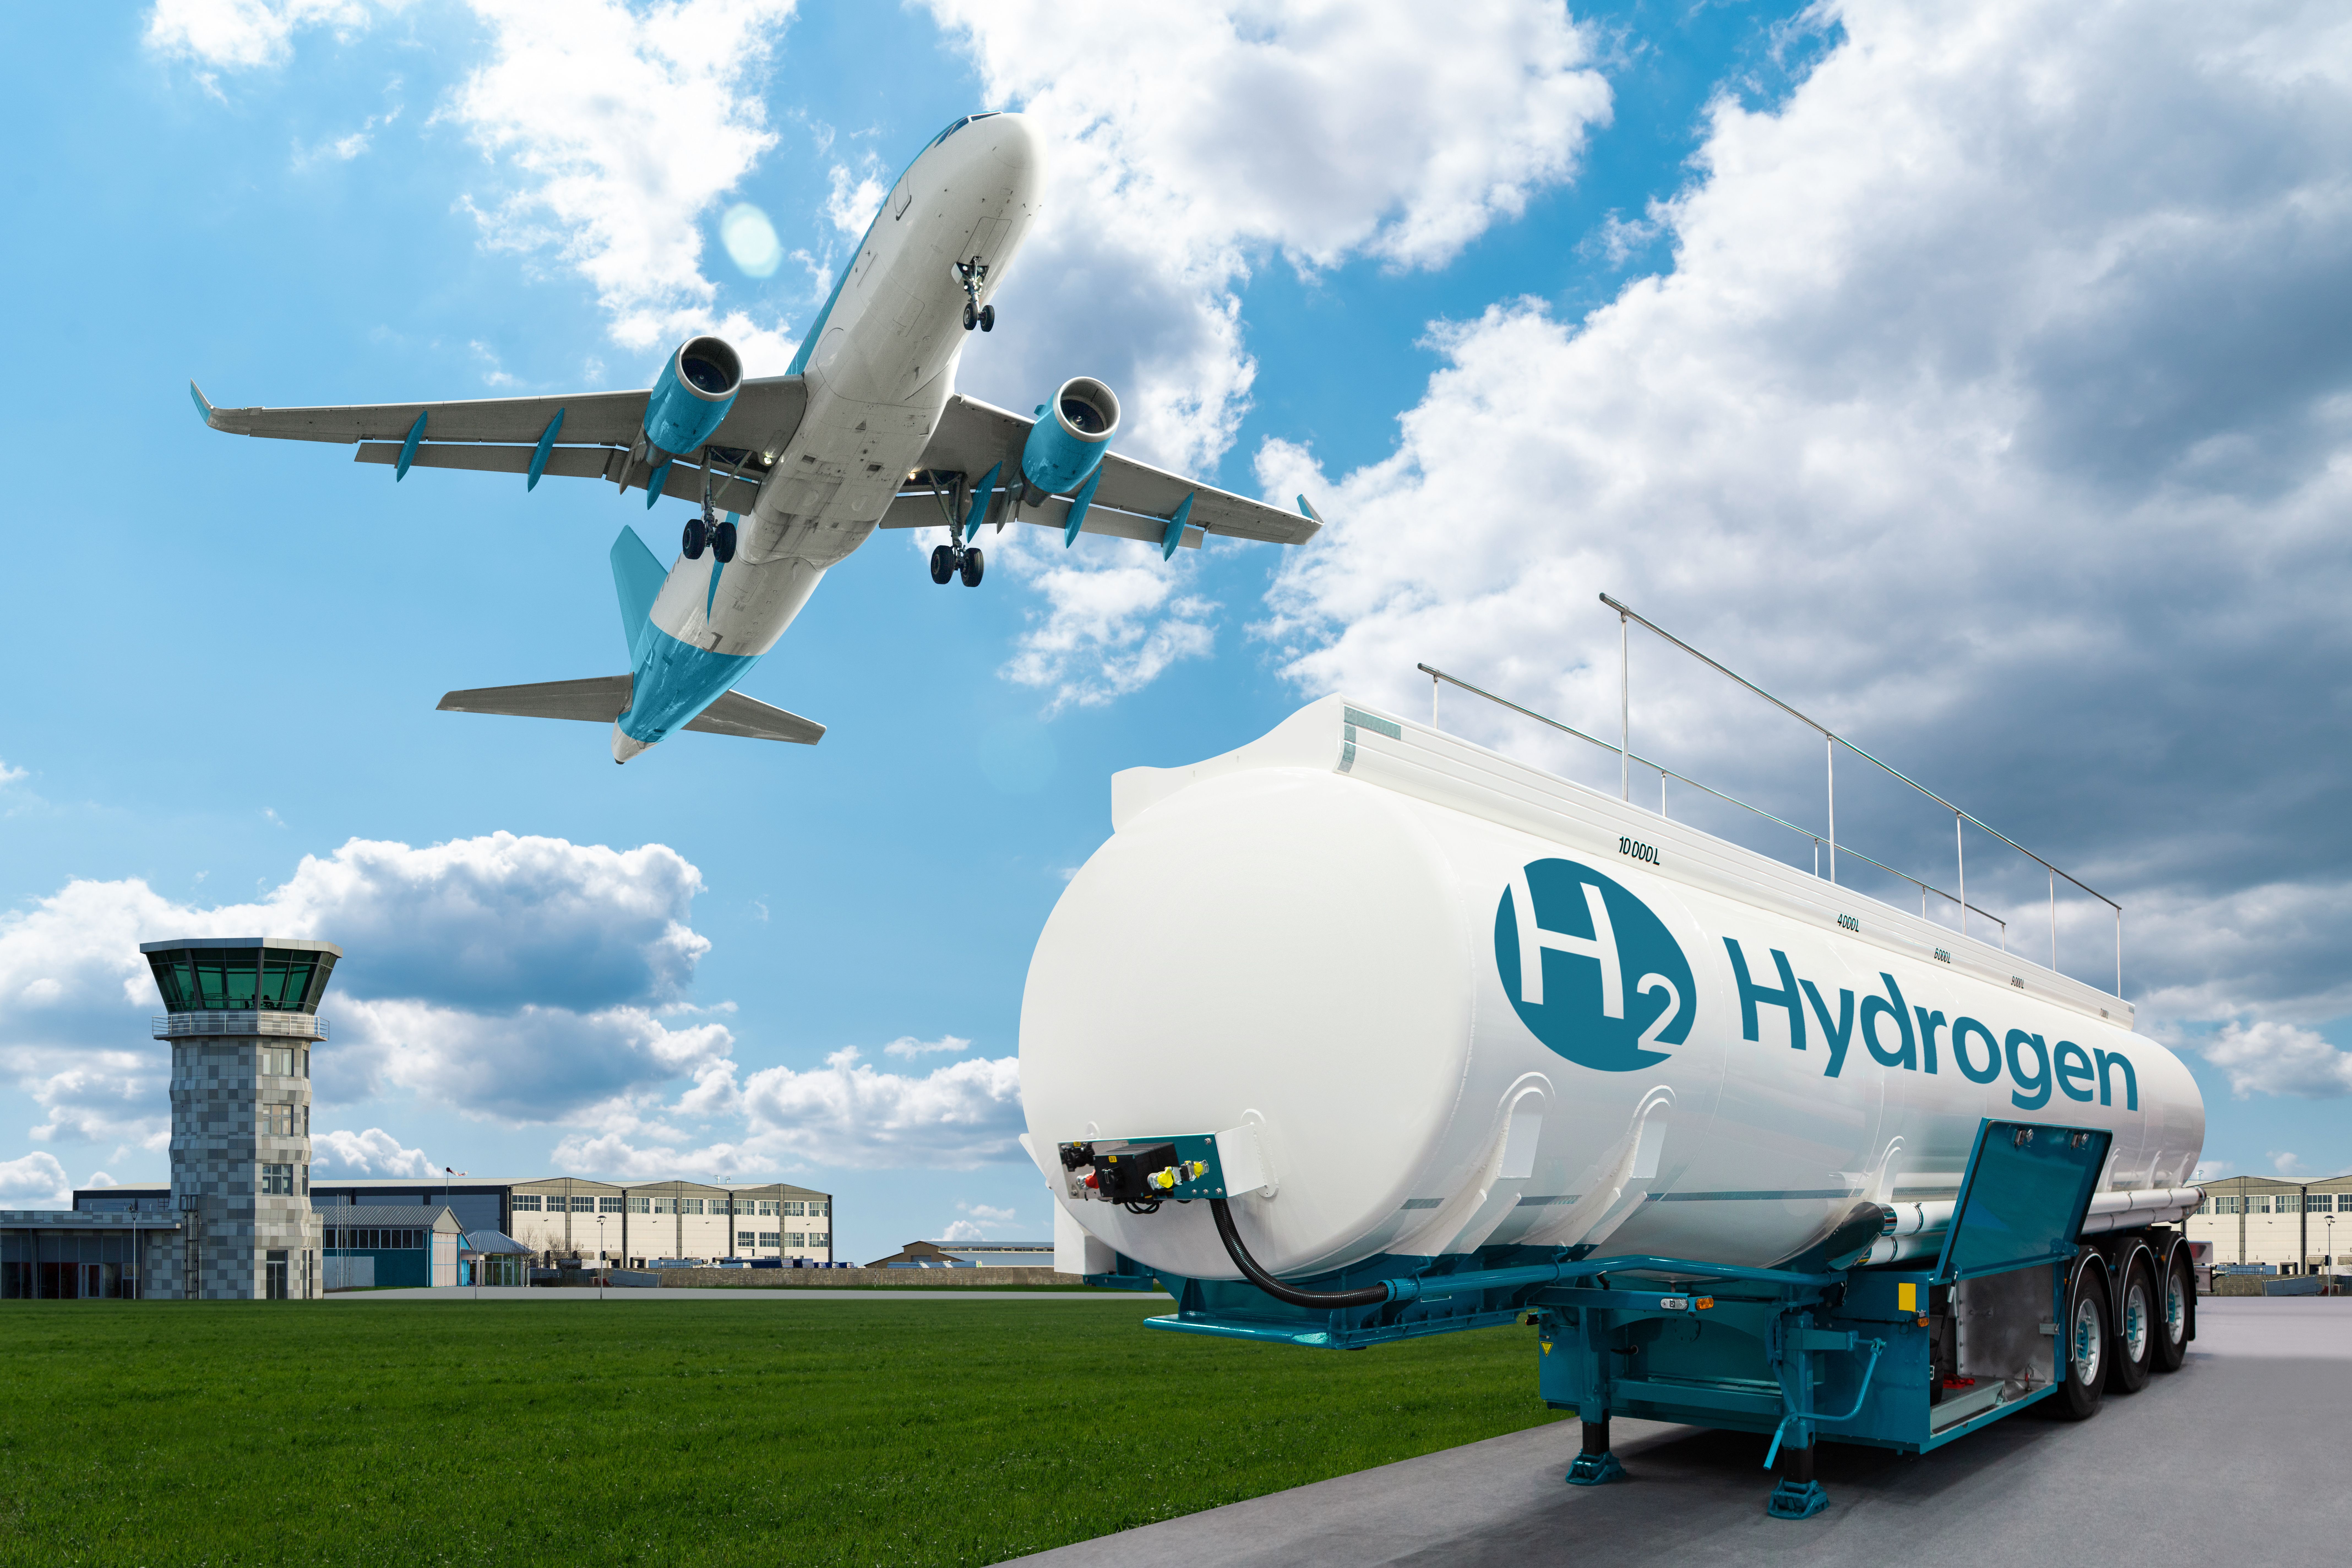 Hydrogen tank and aircraft